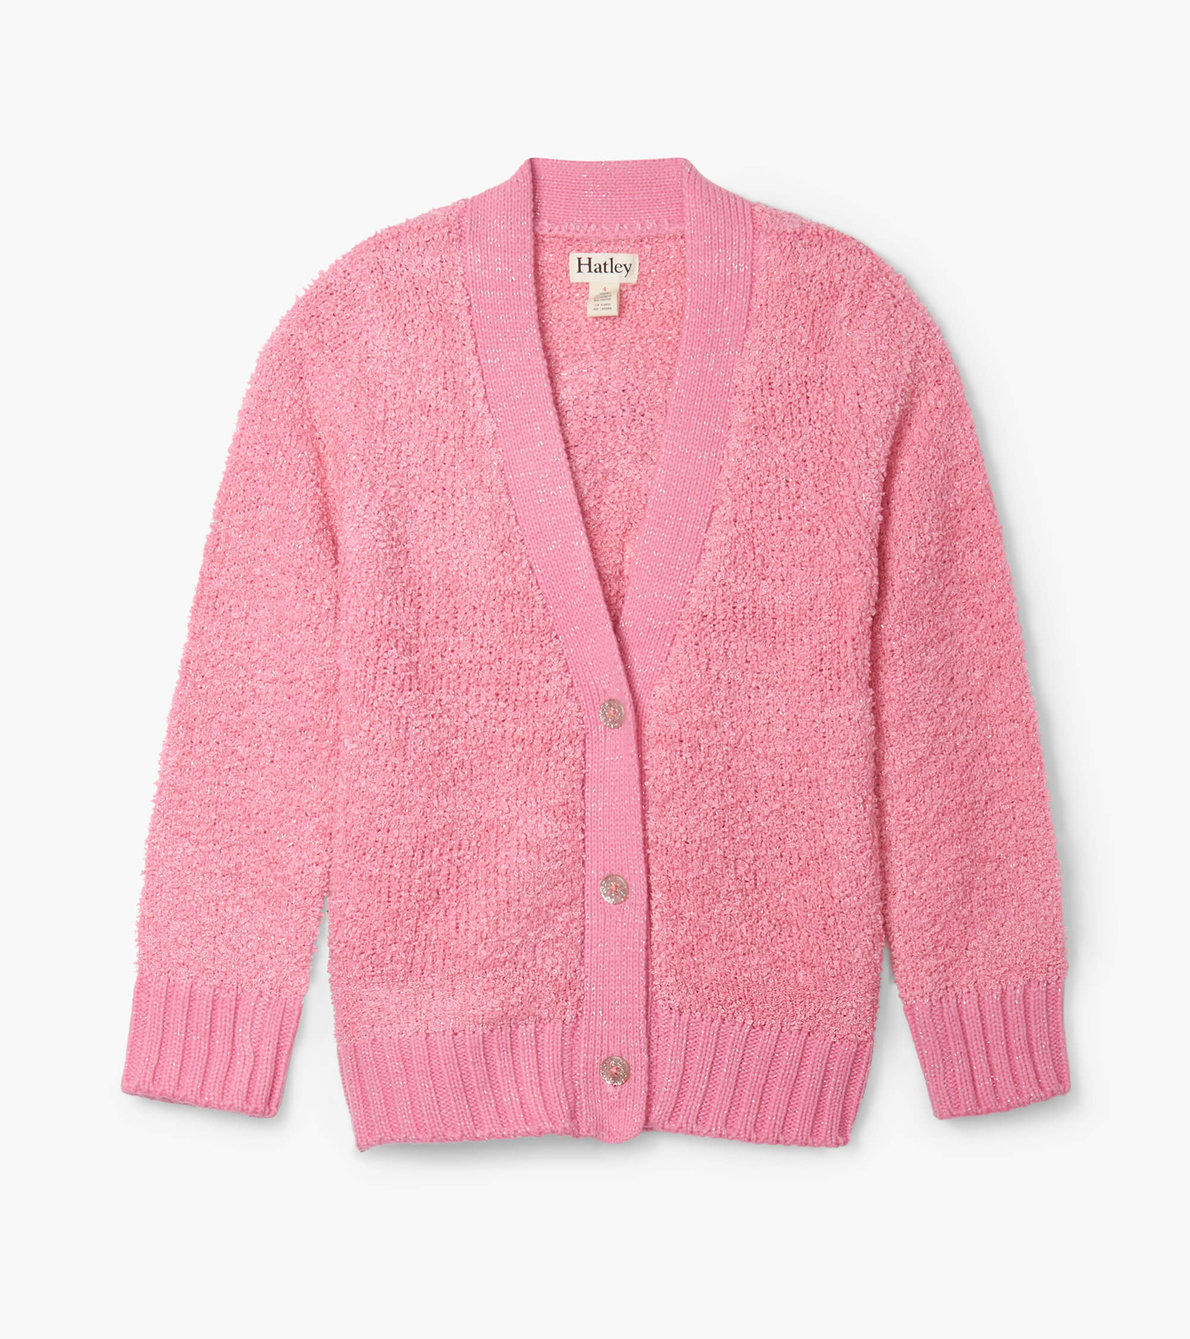 View larger image of Pink Confetti Cardigan